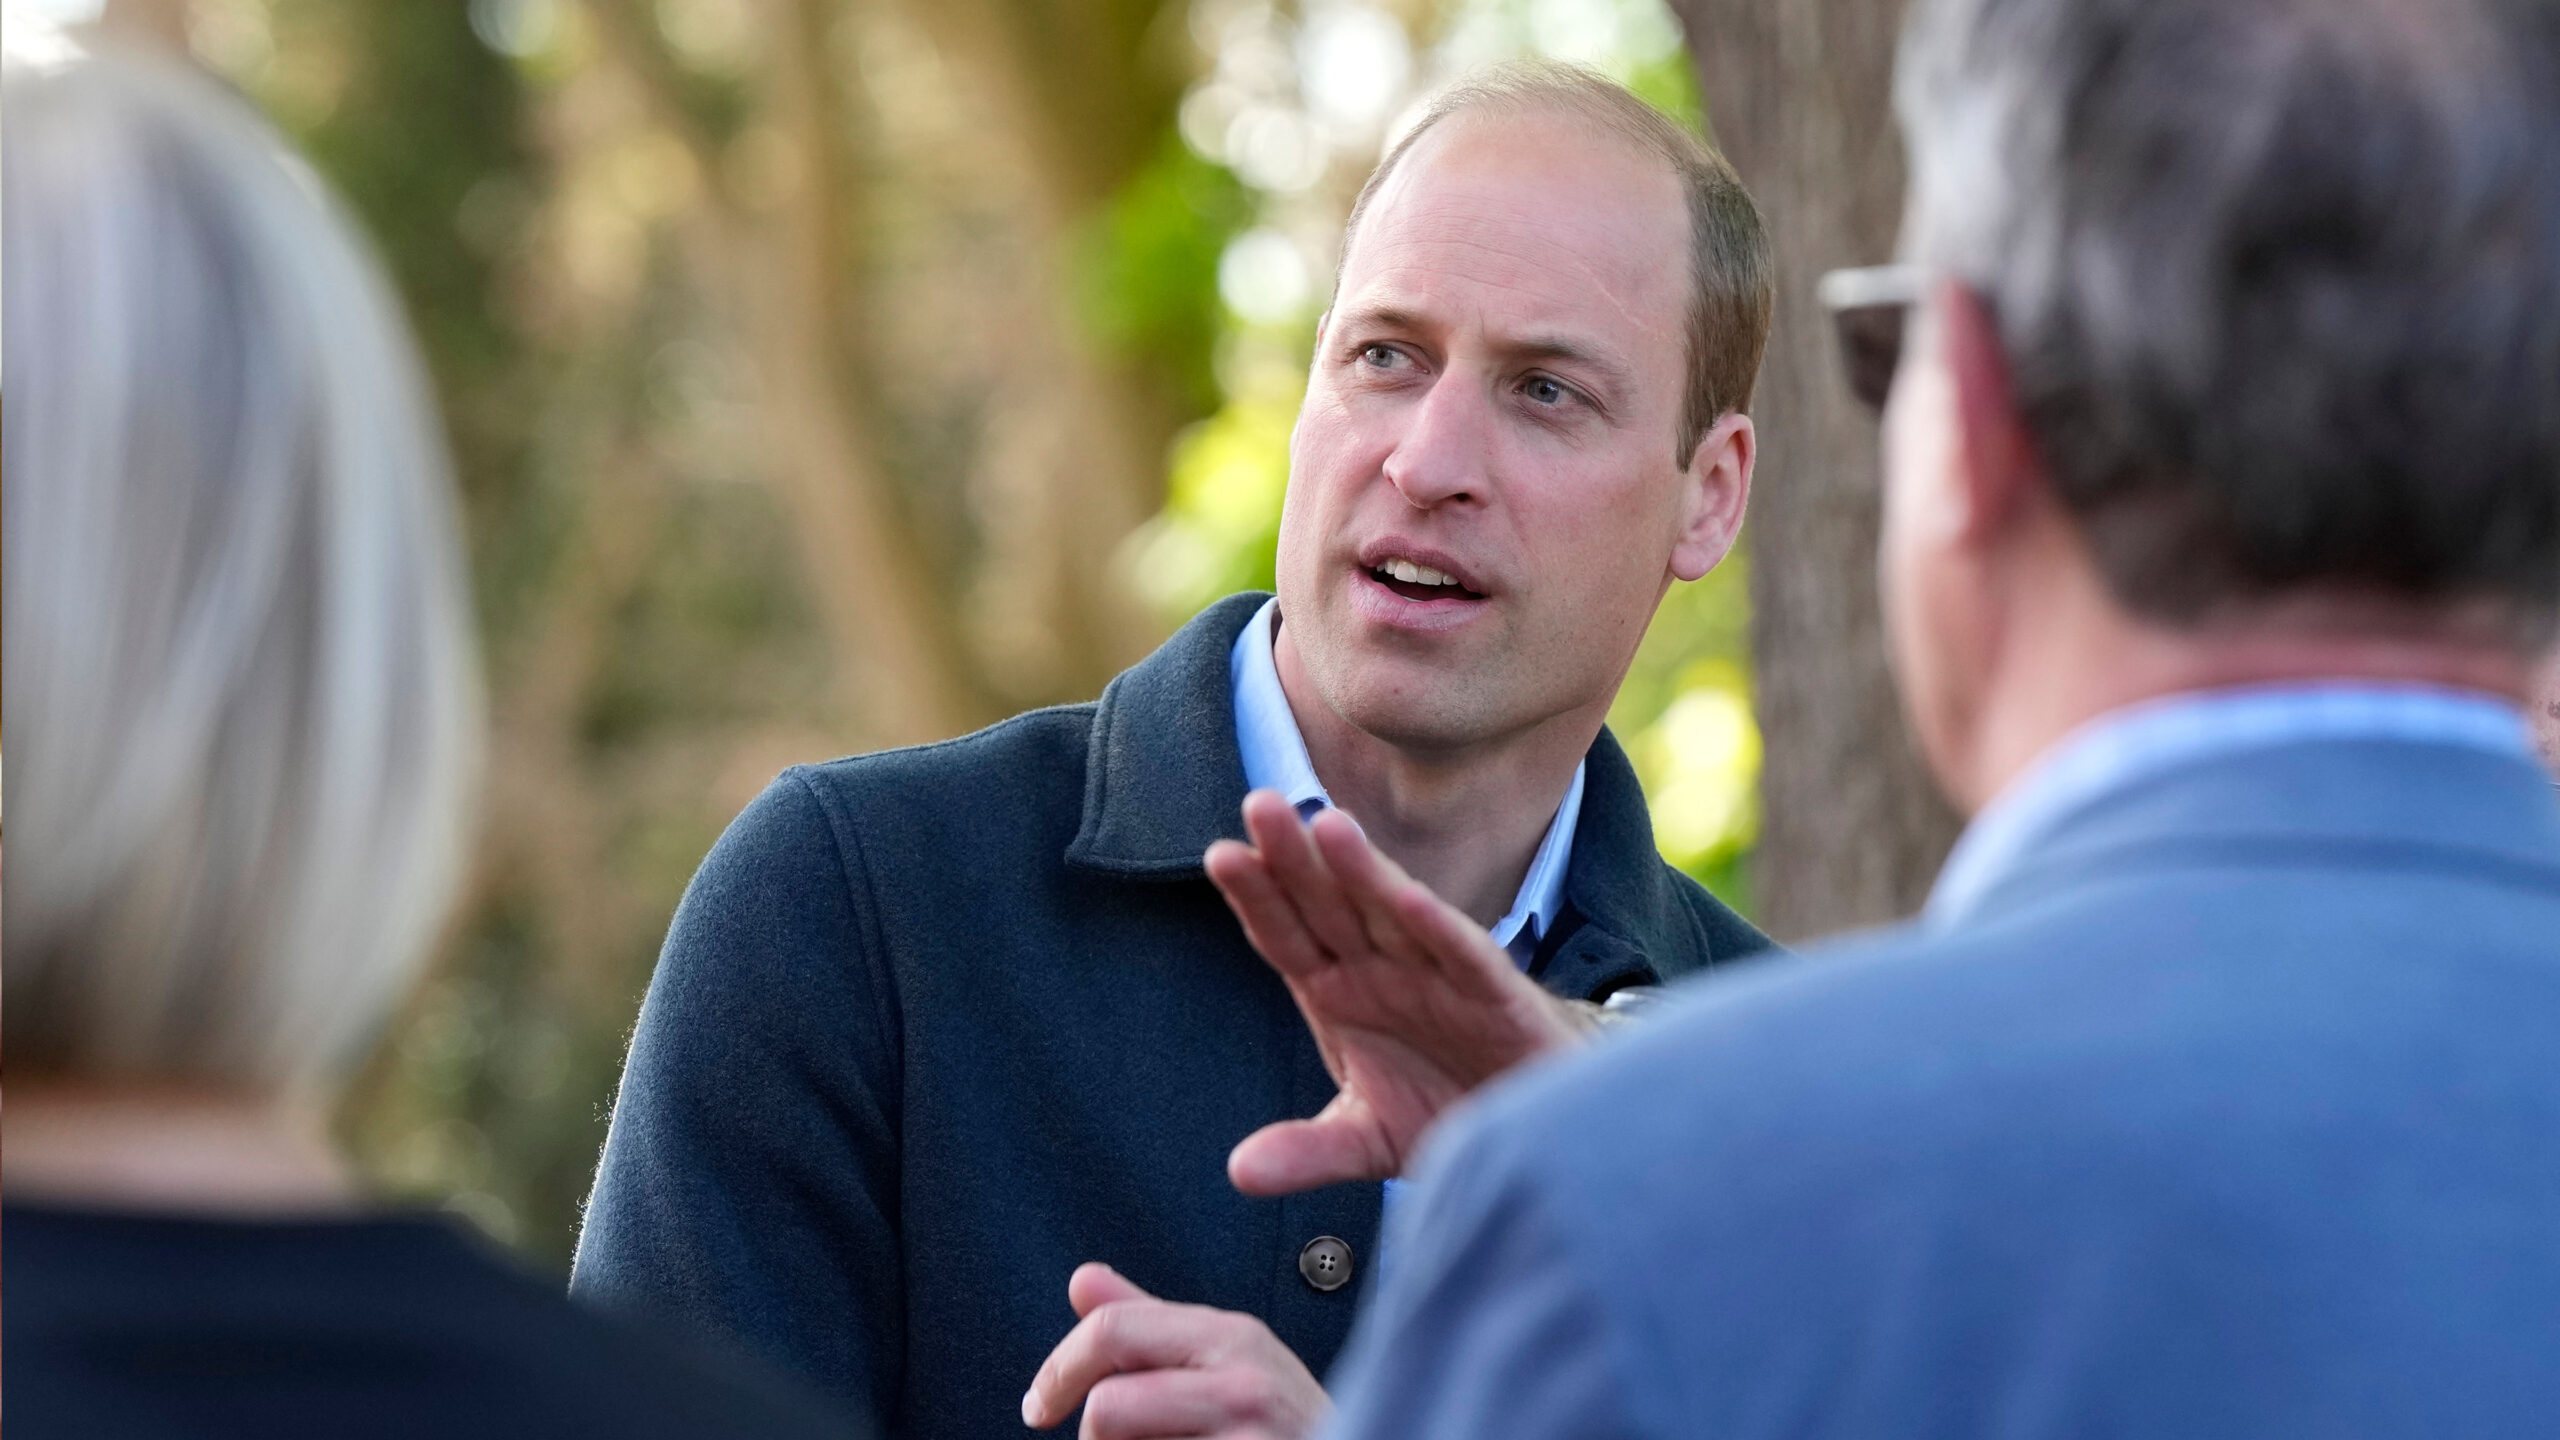 prince-william-returns-to-public-duties-for-first-time-since-kate’s-cancer-diagnosis